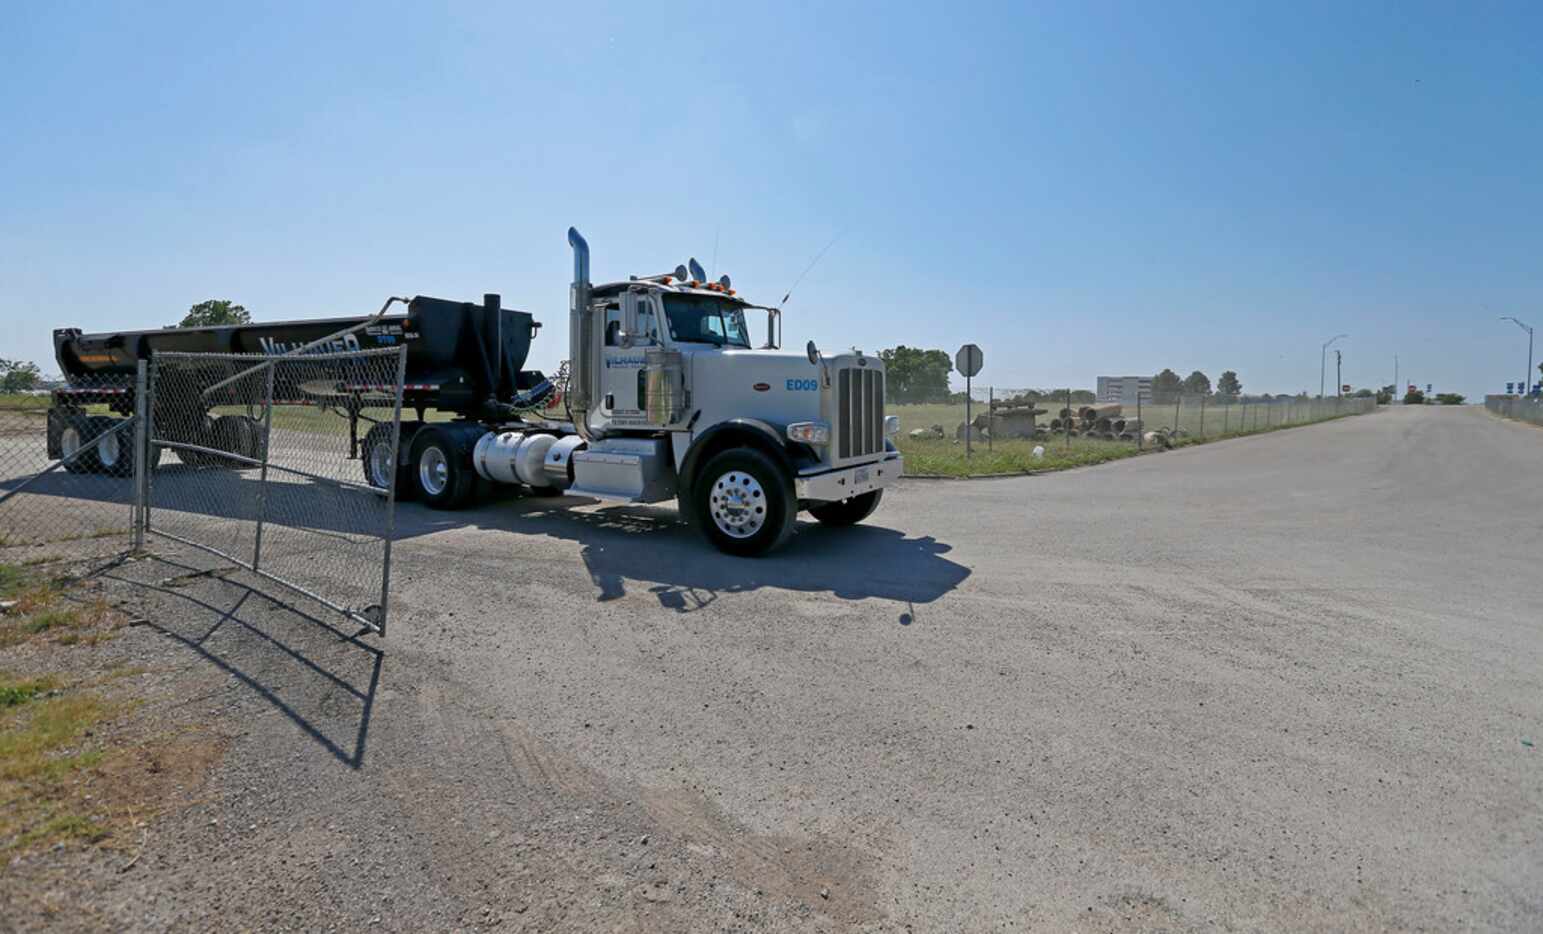 A truck leaves the Bayside project area near Lake Ray Hubbard in Rowlett on Thursday (Jae S....